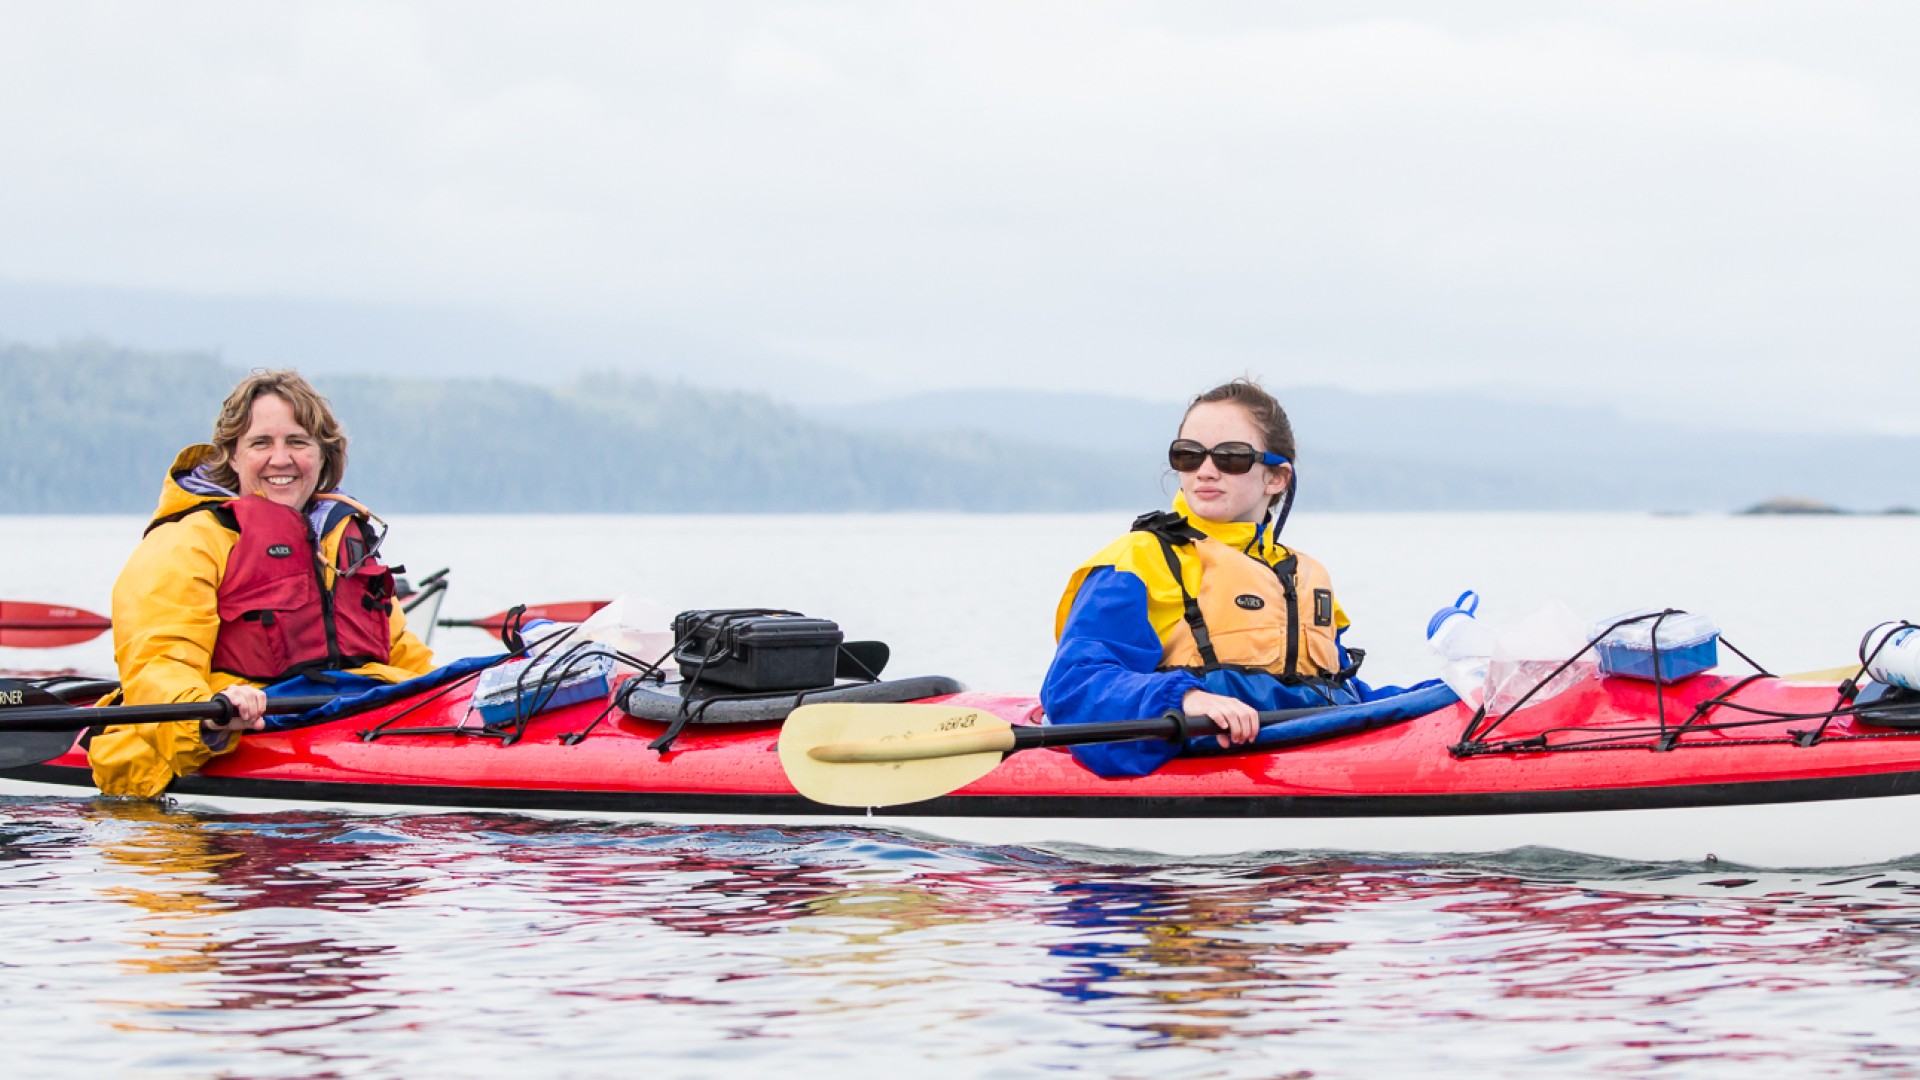 Two women in a red sea kayak on still water in the Johnstone Strait on a cloudy day